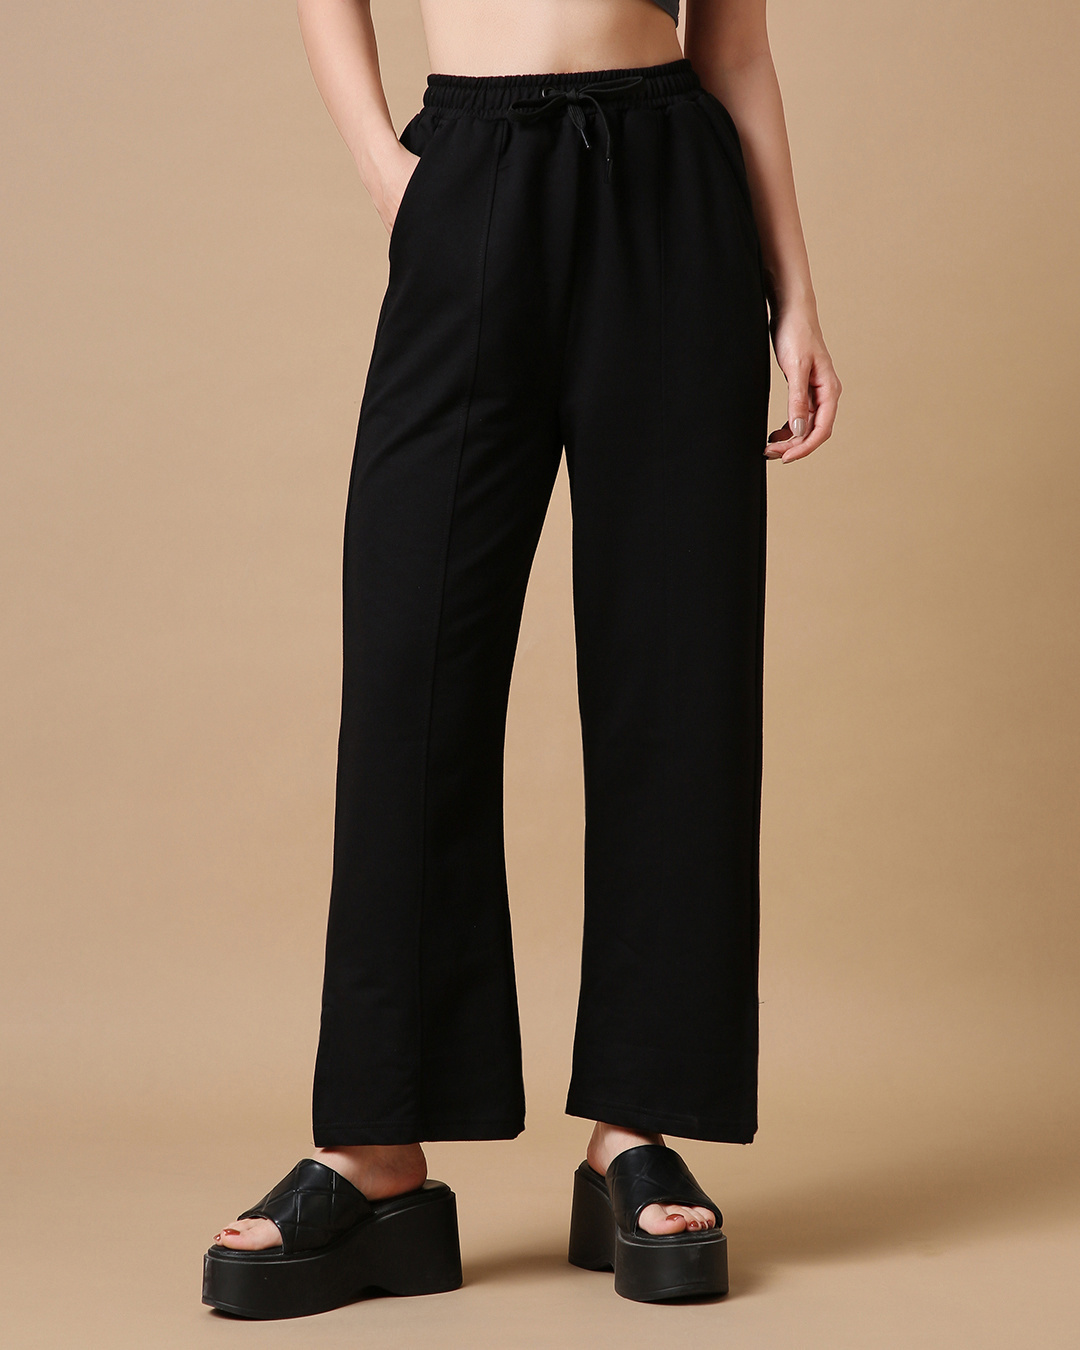 Buy Women's Black Relaxed Fit Track Pants Online at Bewakoof